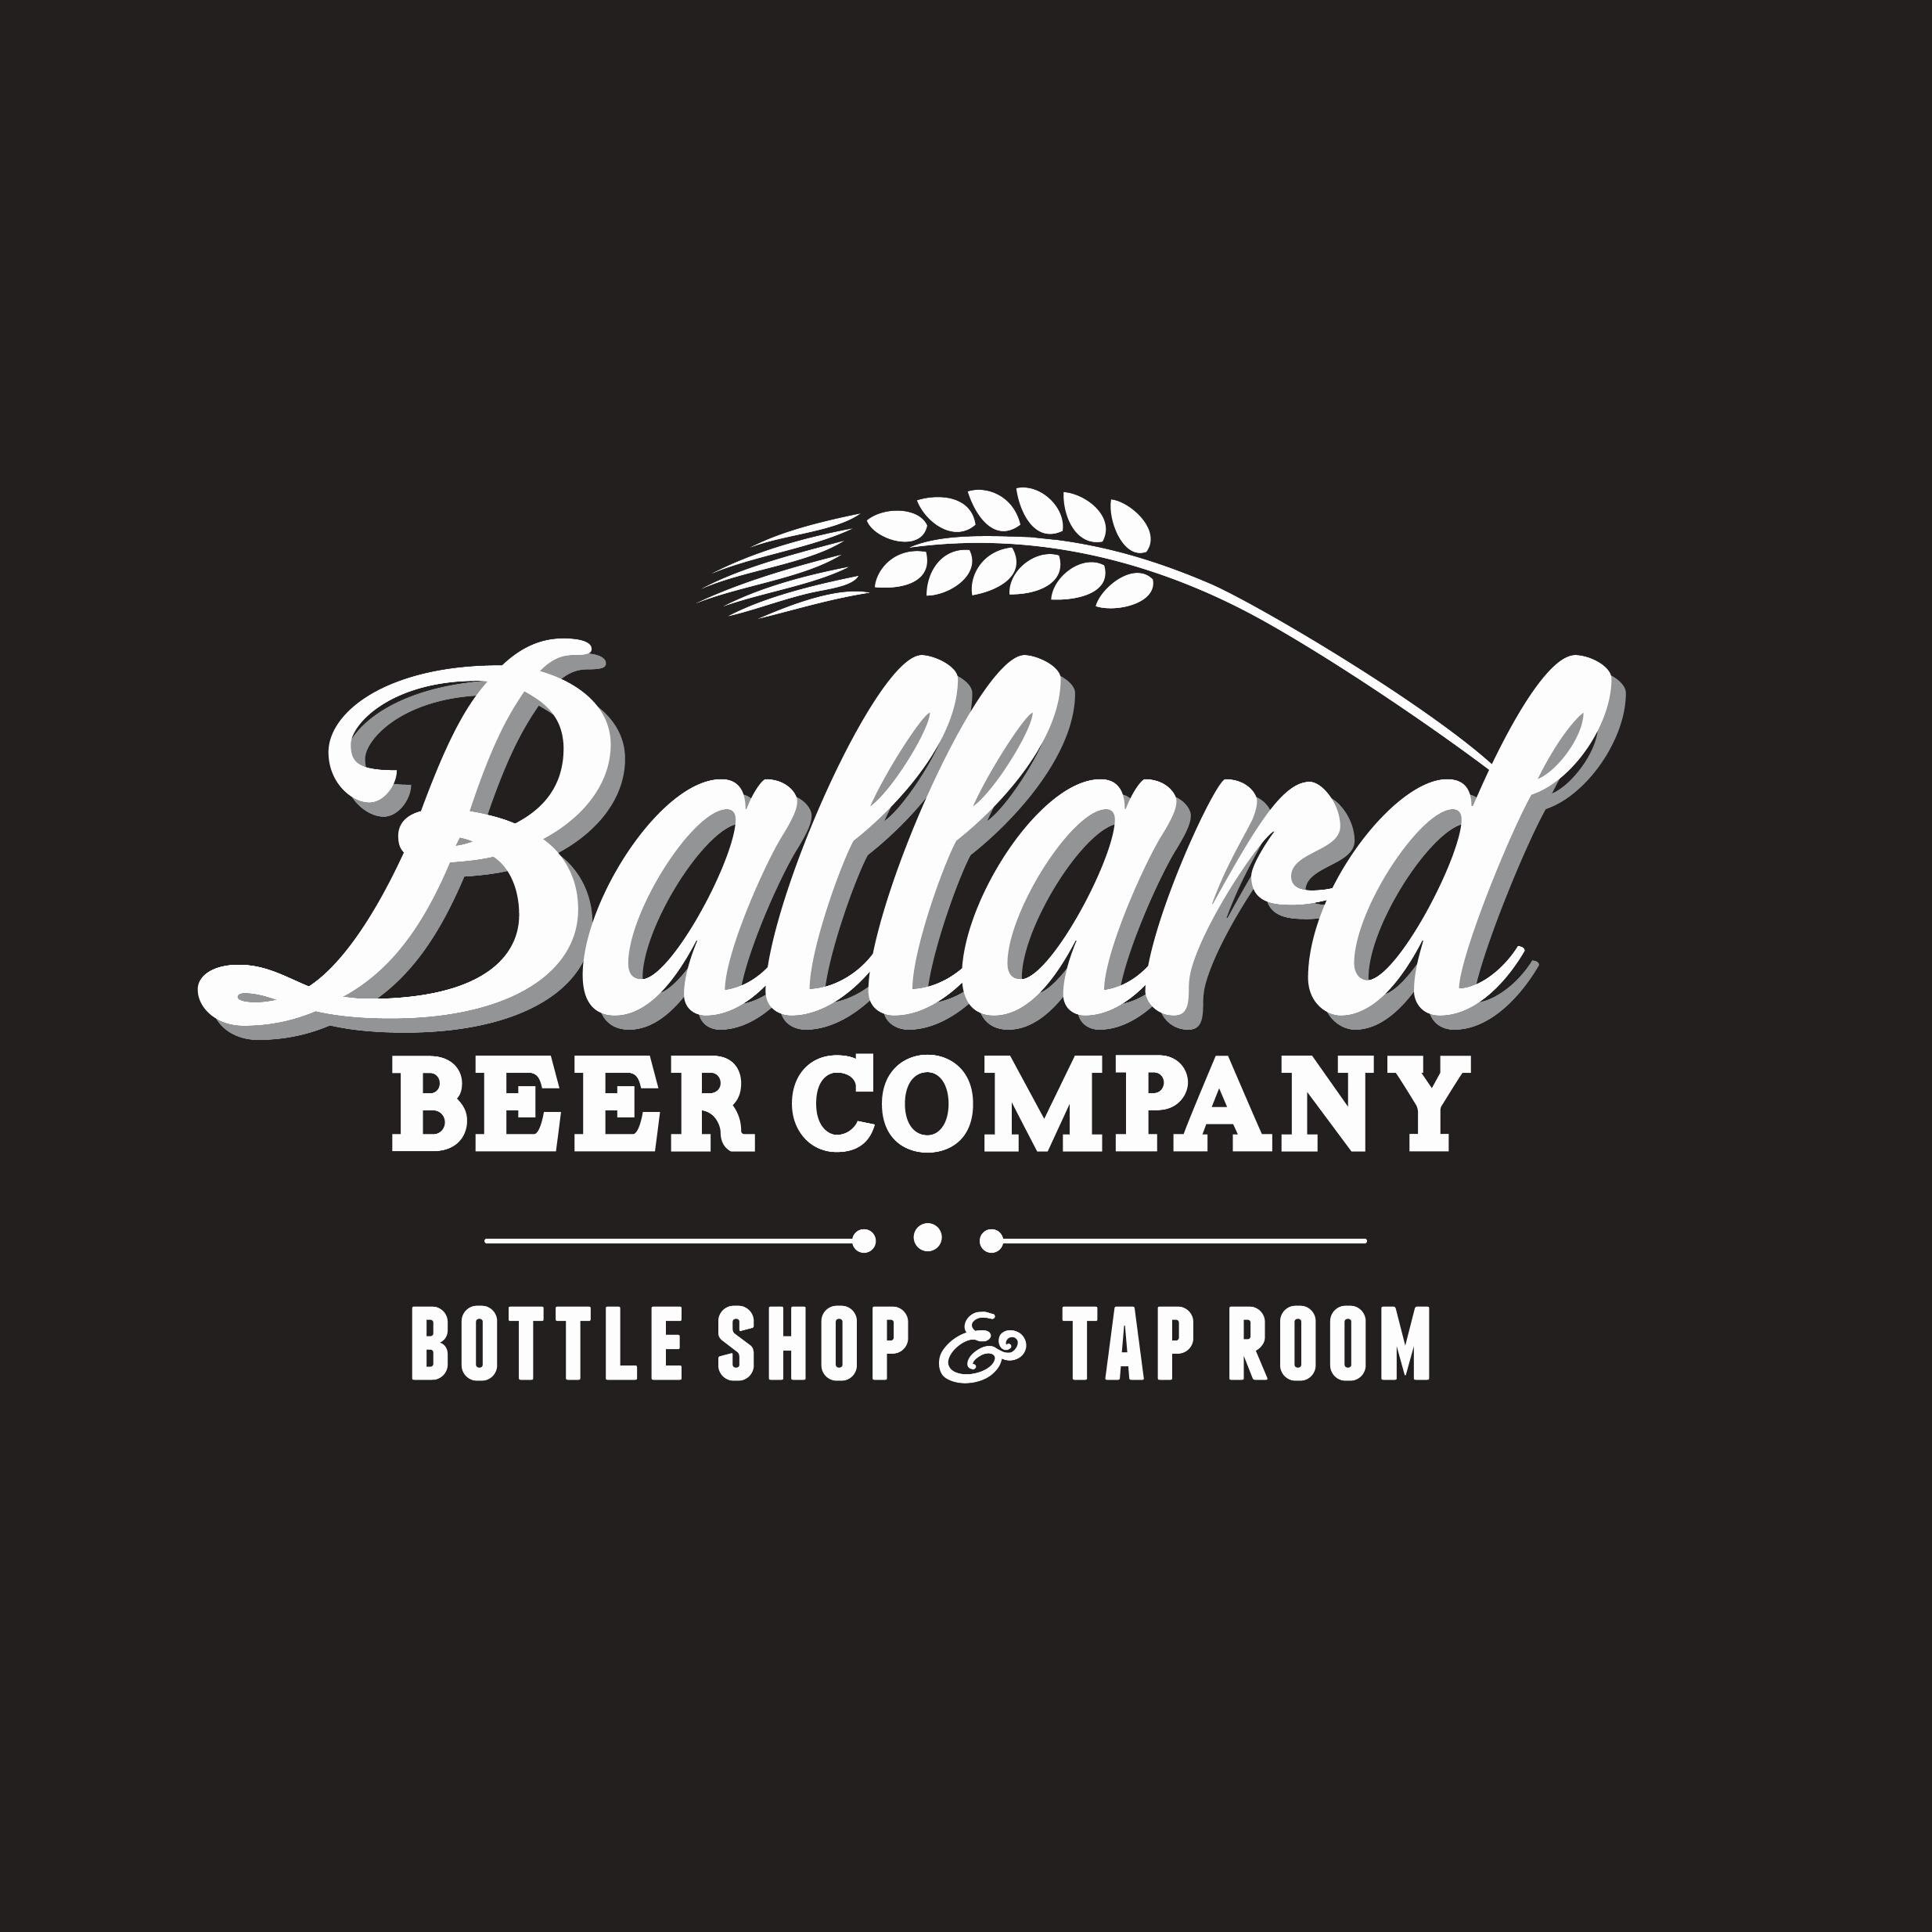 We love beer and we love Ballard... We offer a wide variety of amazing craft beers brewed right in our neighborhood.